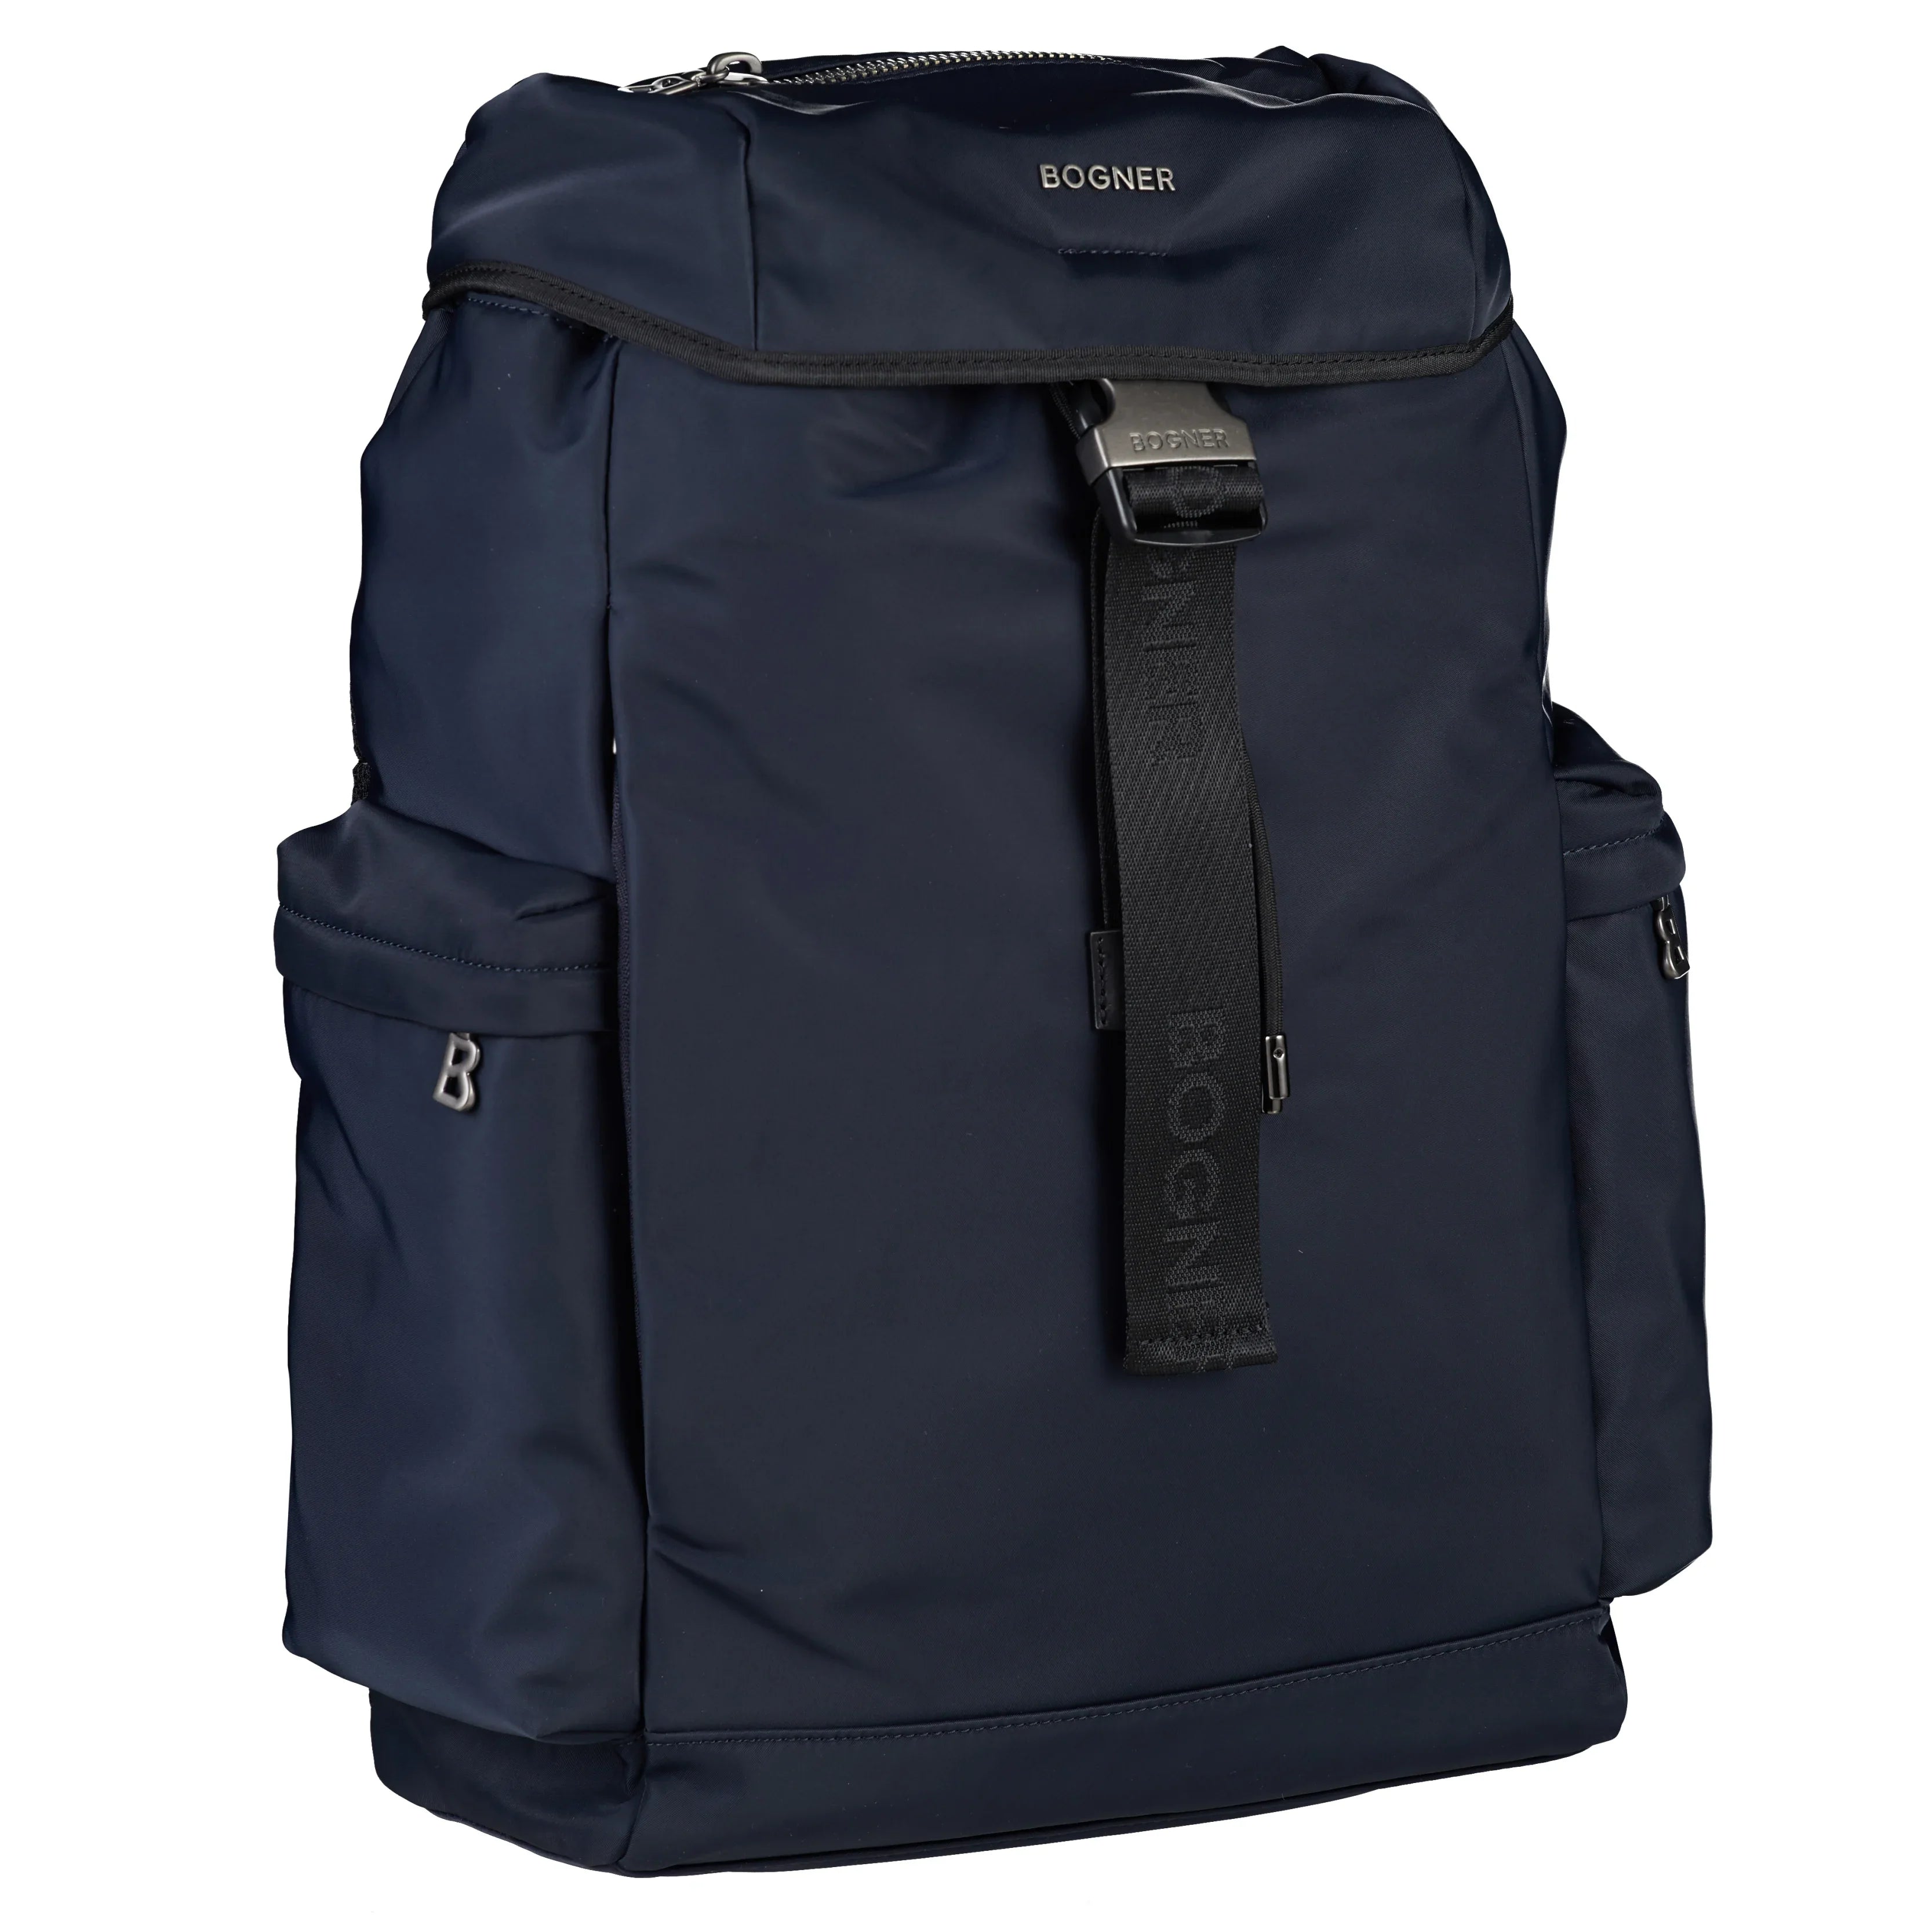 Bogner Klosters Aaron backpack LVF with laptop compartment 47 cm - dark blue